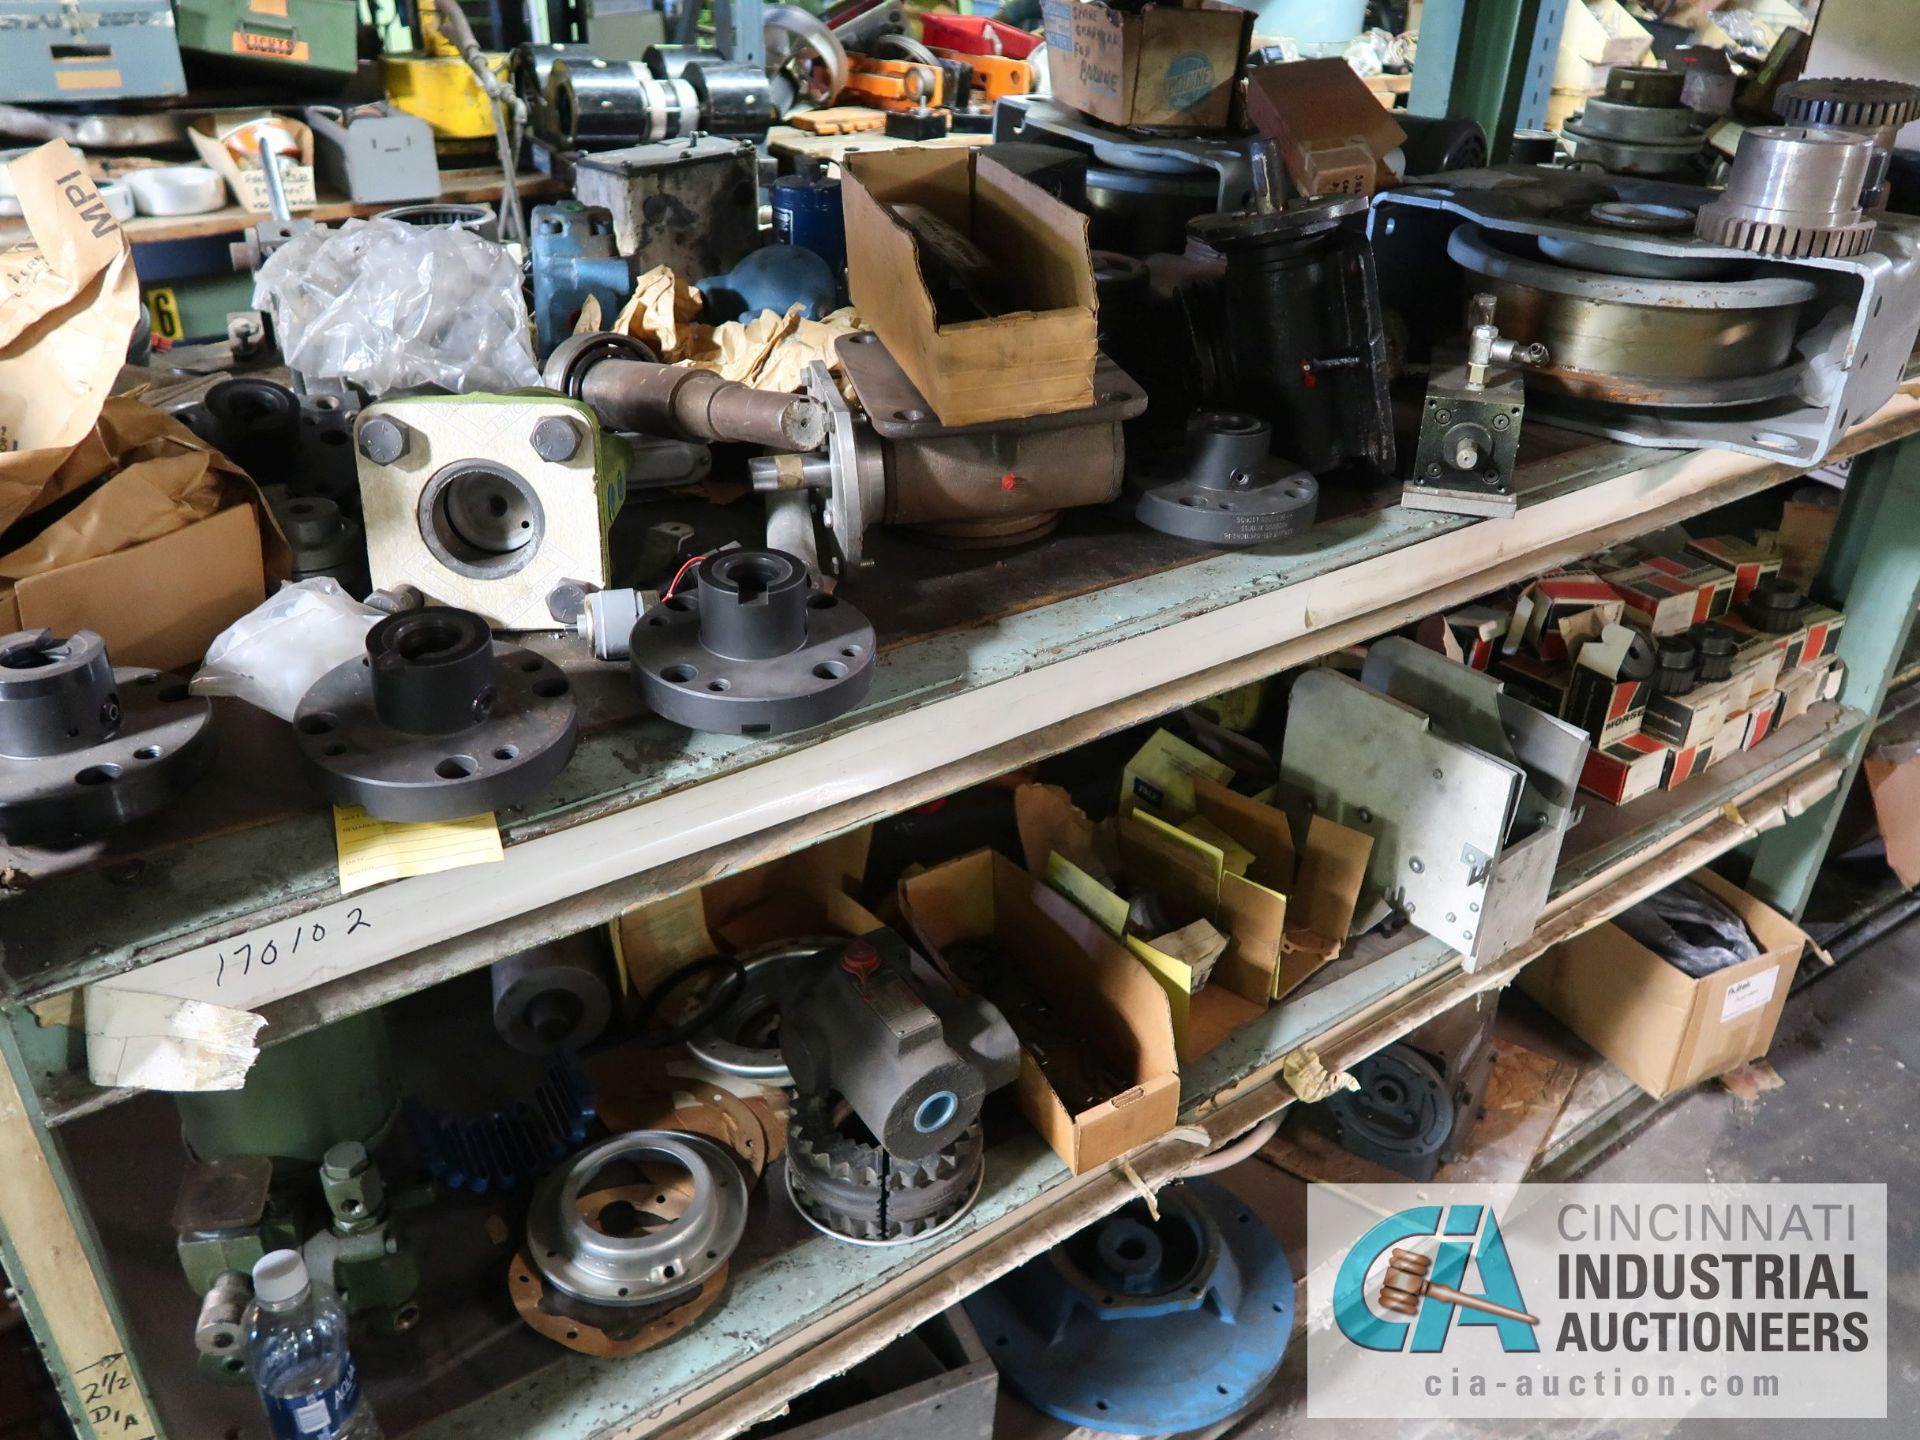 (LOT) MACHINE PARTS, COMPRESSORS, REDUCERS, GEARS, MOTORS, AND OTHER (4) SECTIONS RACK - Image 22 of 28